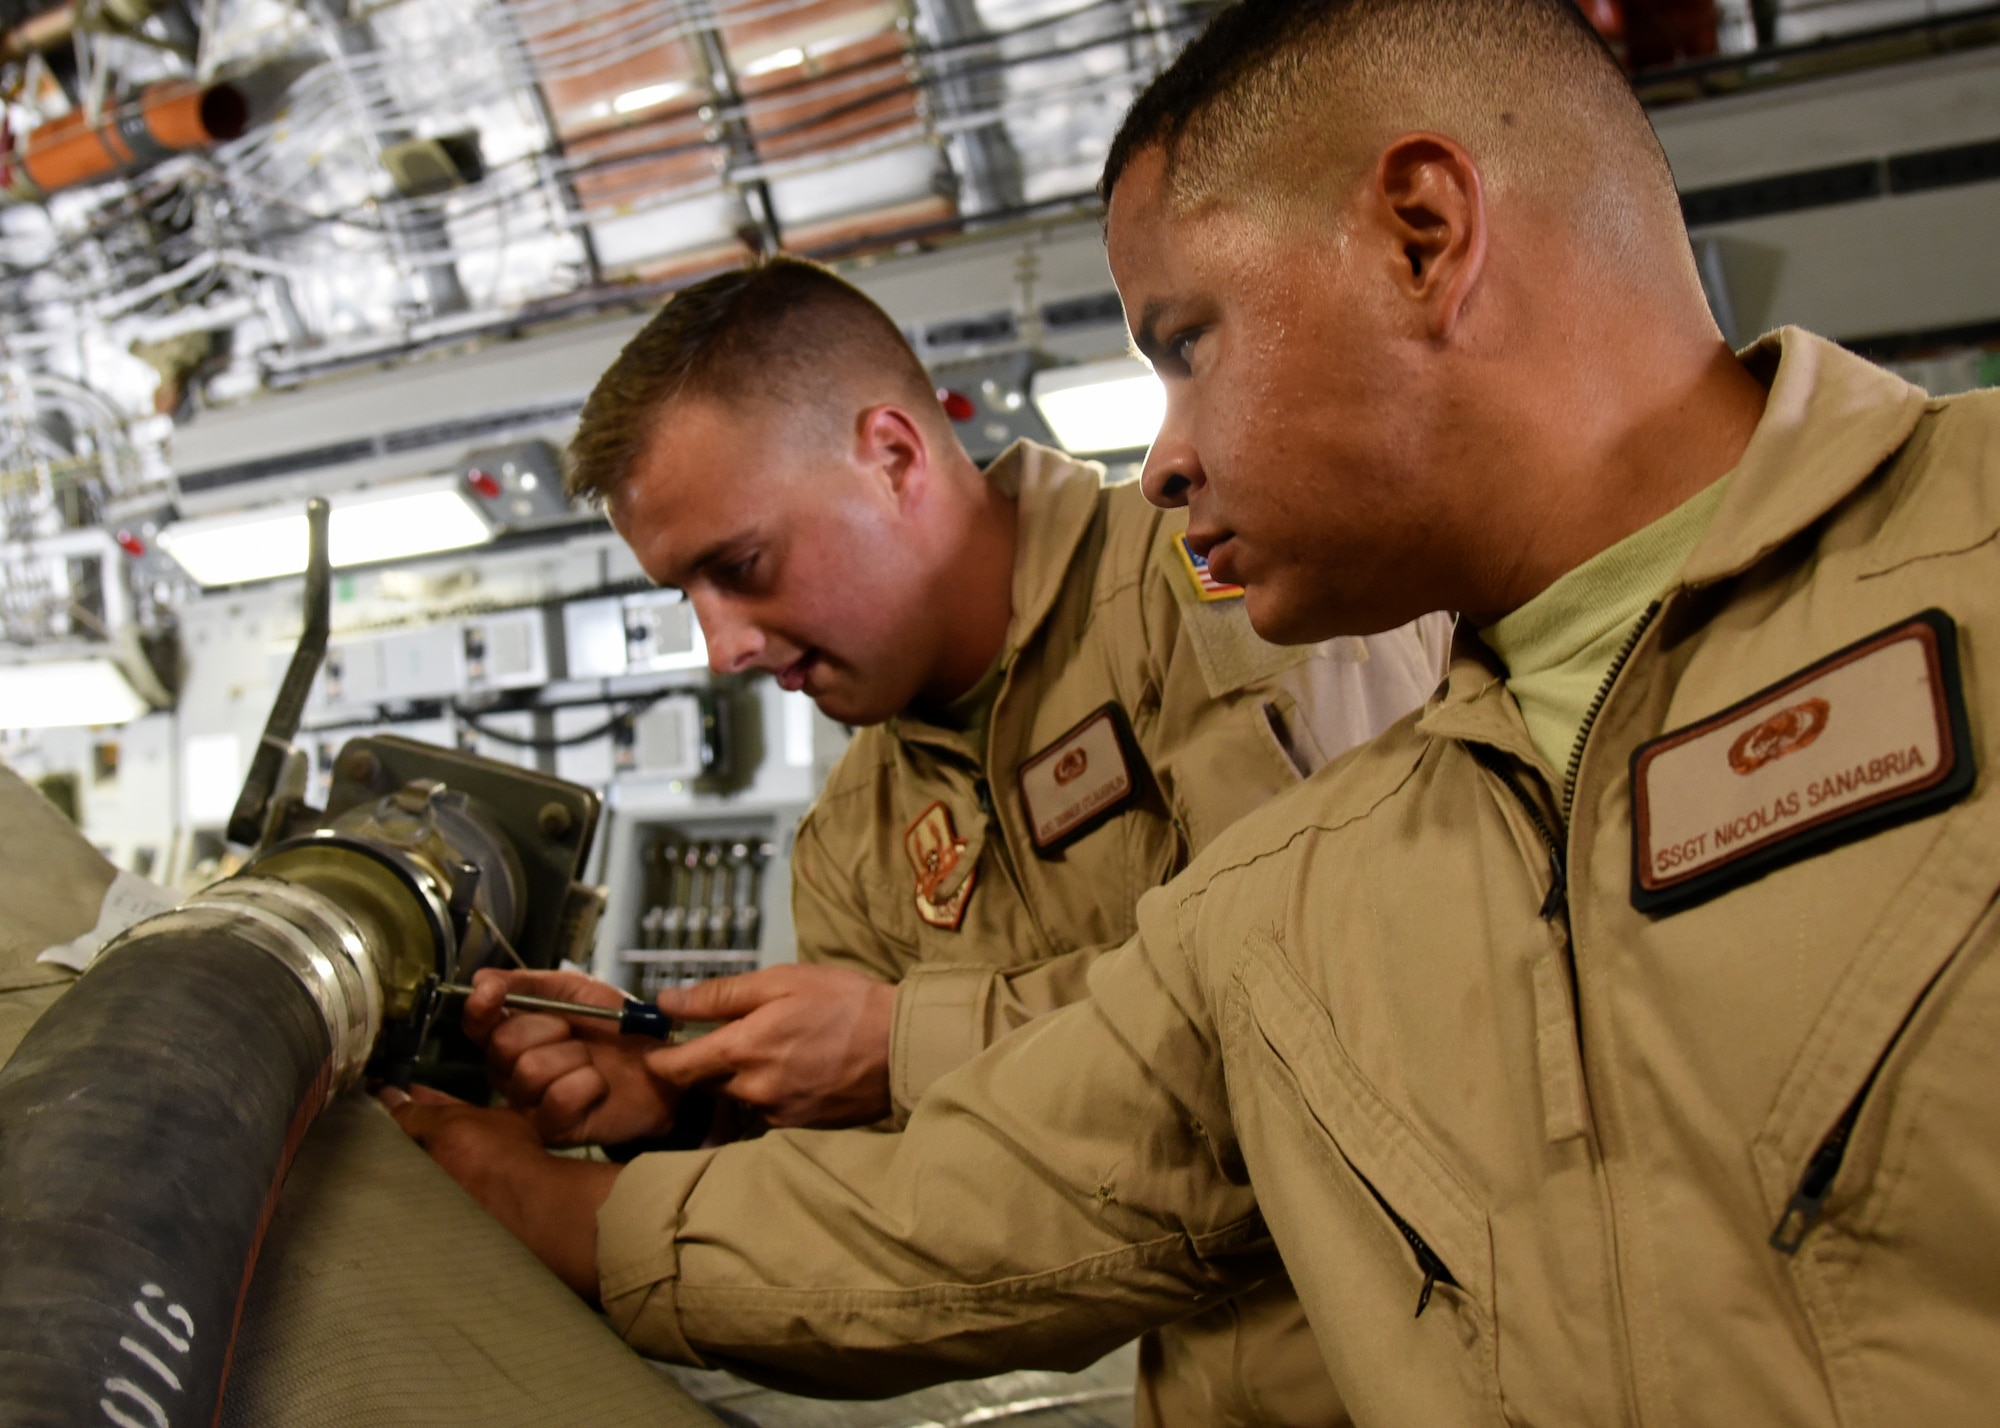 Airman 1st Class Tanner O'Laughlin (left) and Staff Sgt. Nicolas Sanabria (right) secure a fuel hose to a 2,800 gallon fuel bladder at Al Udeid Air Base, Qatar, May 11, 2018. This delivery is the first of its kind in more than a year and a half. (U.S Air Force photo by Staff Sgt. Enjoli Saunders)